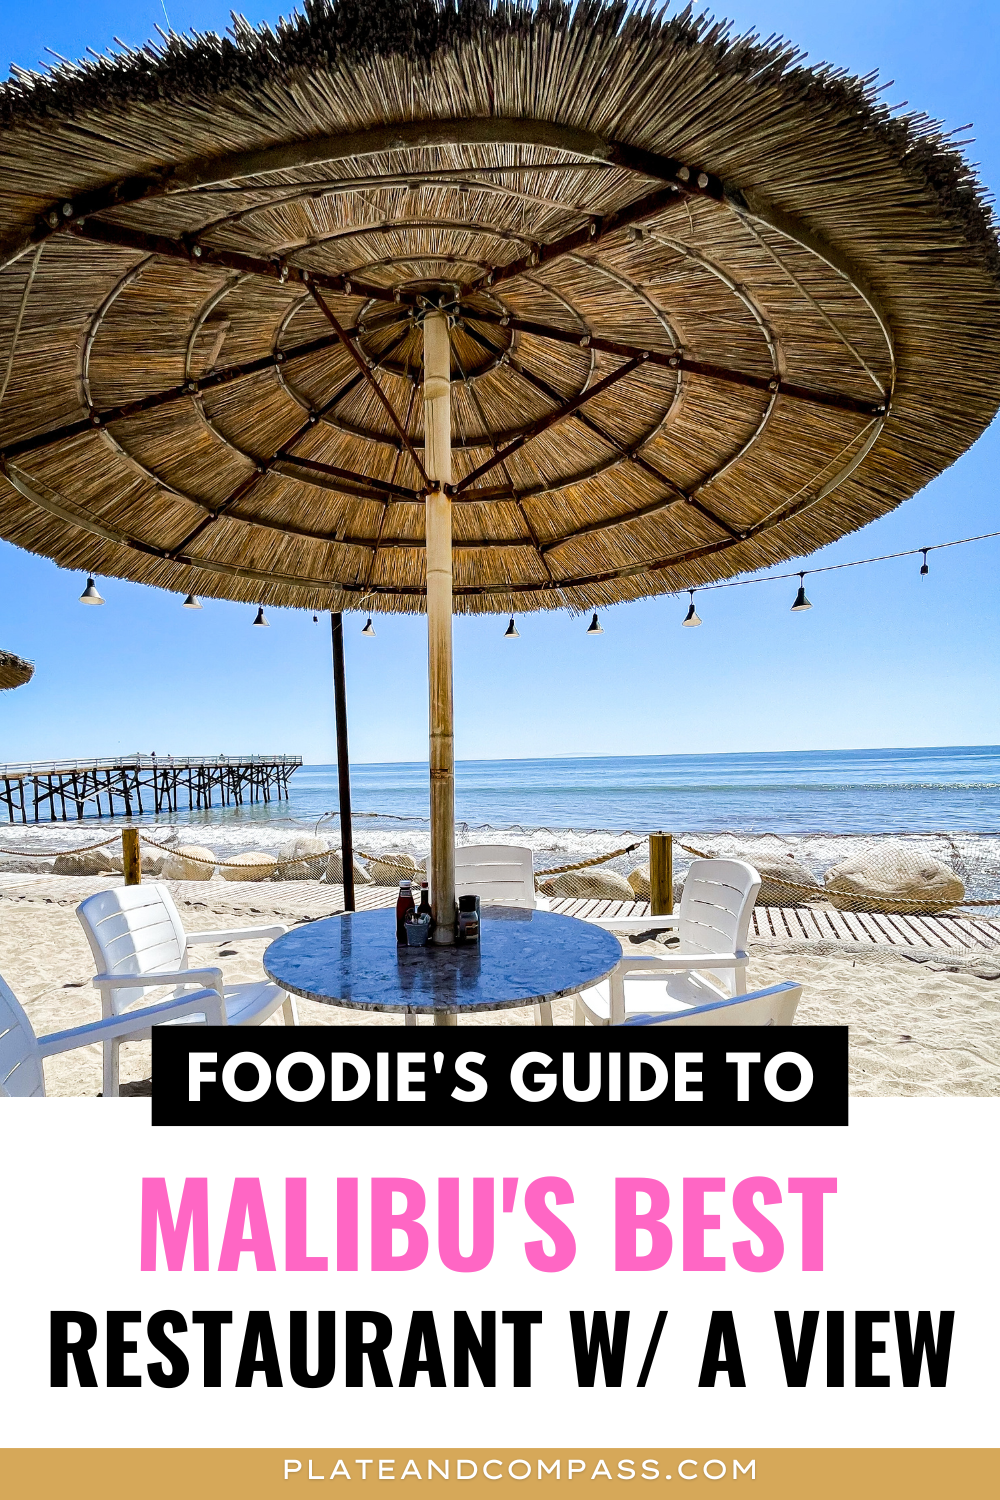 Foodie's Guide to Malibu's Best Restaurant with a View